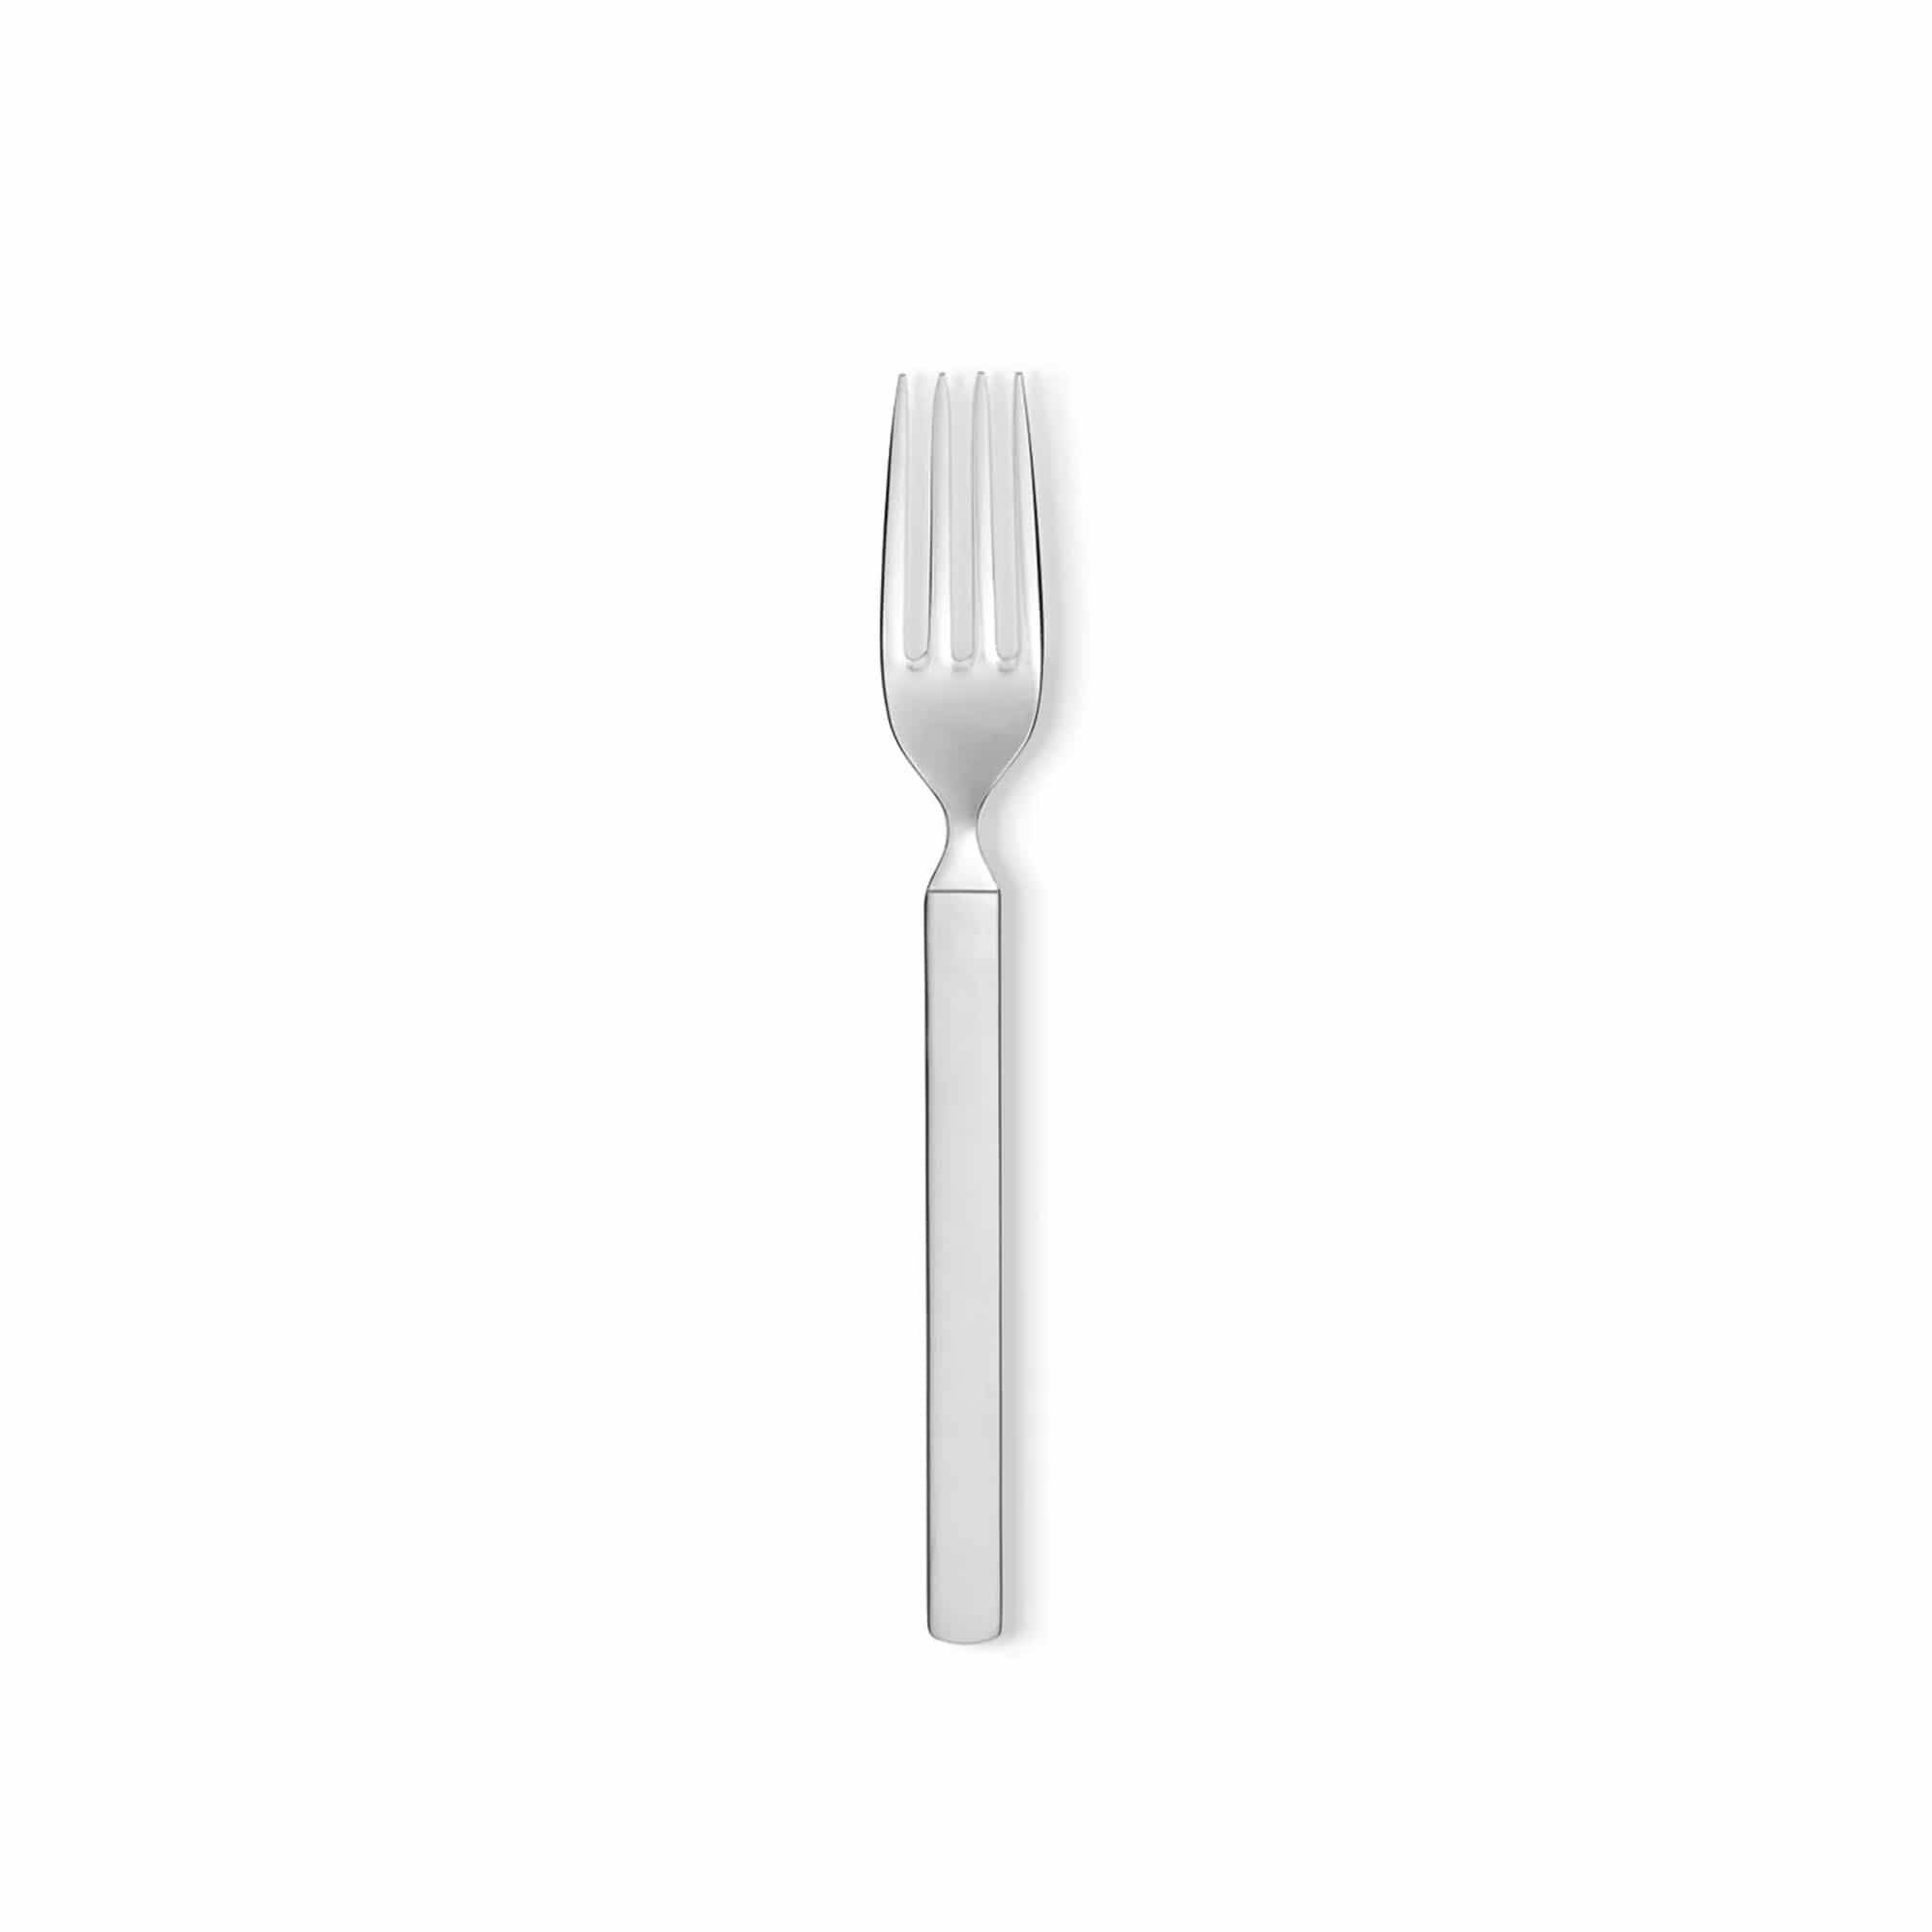 Dry Table fork